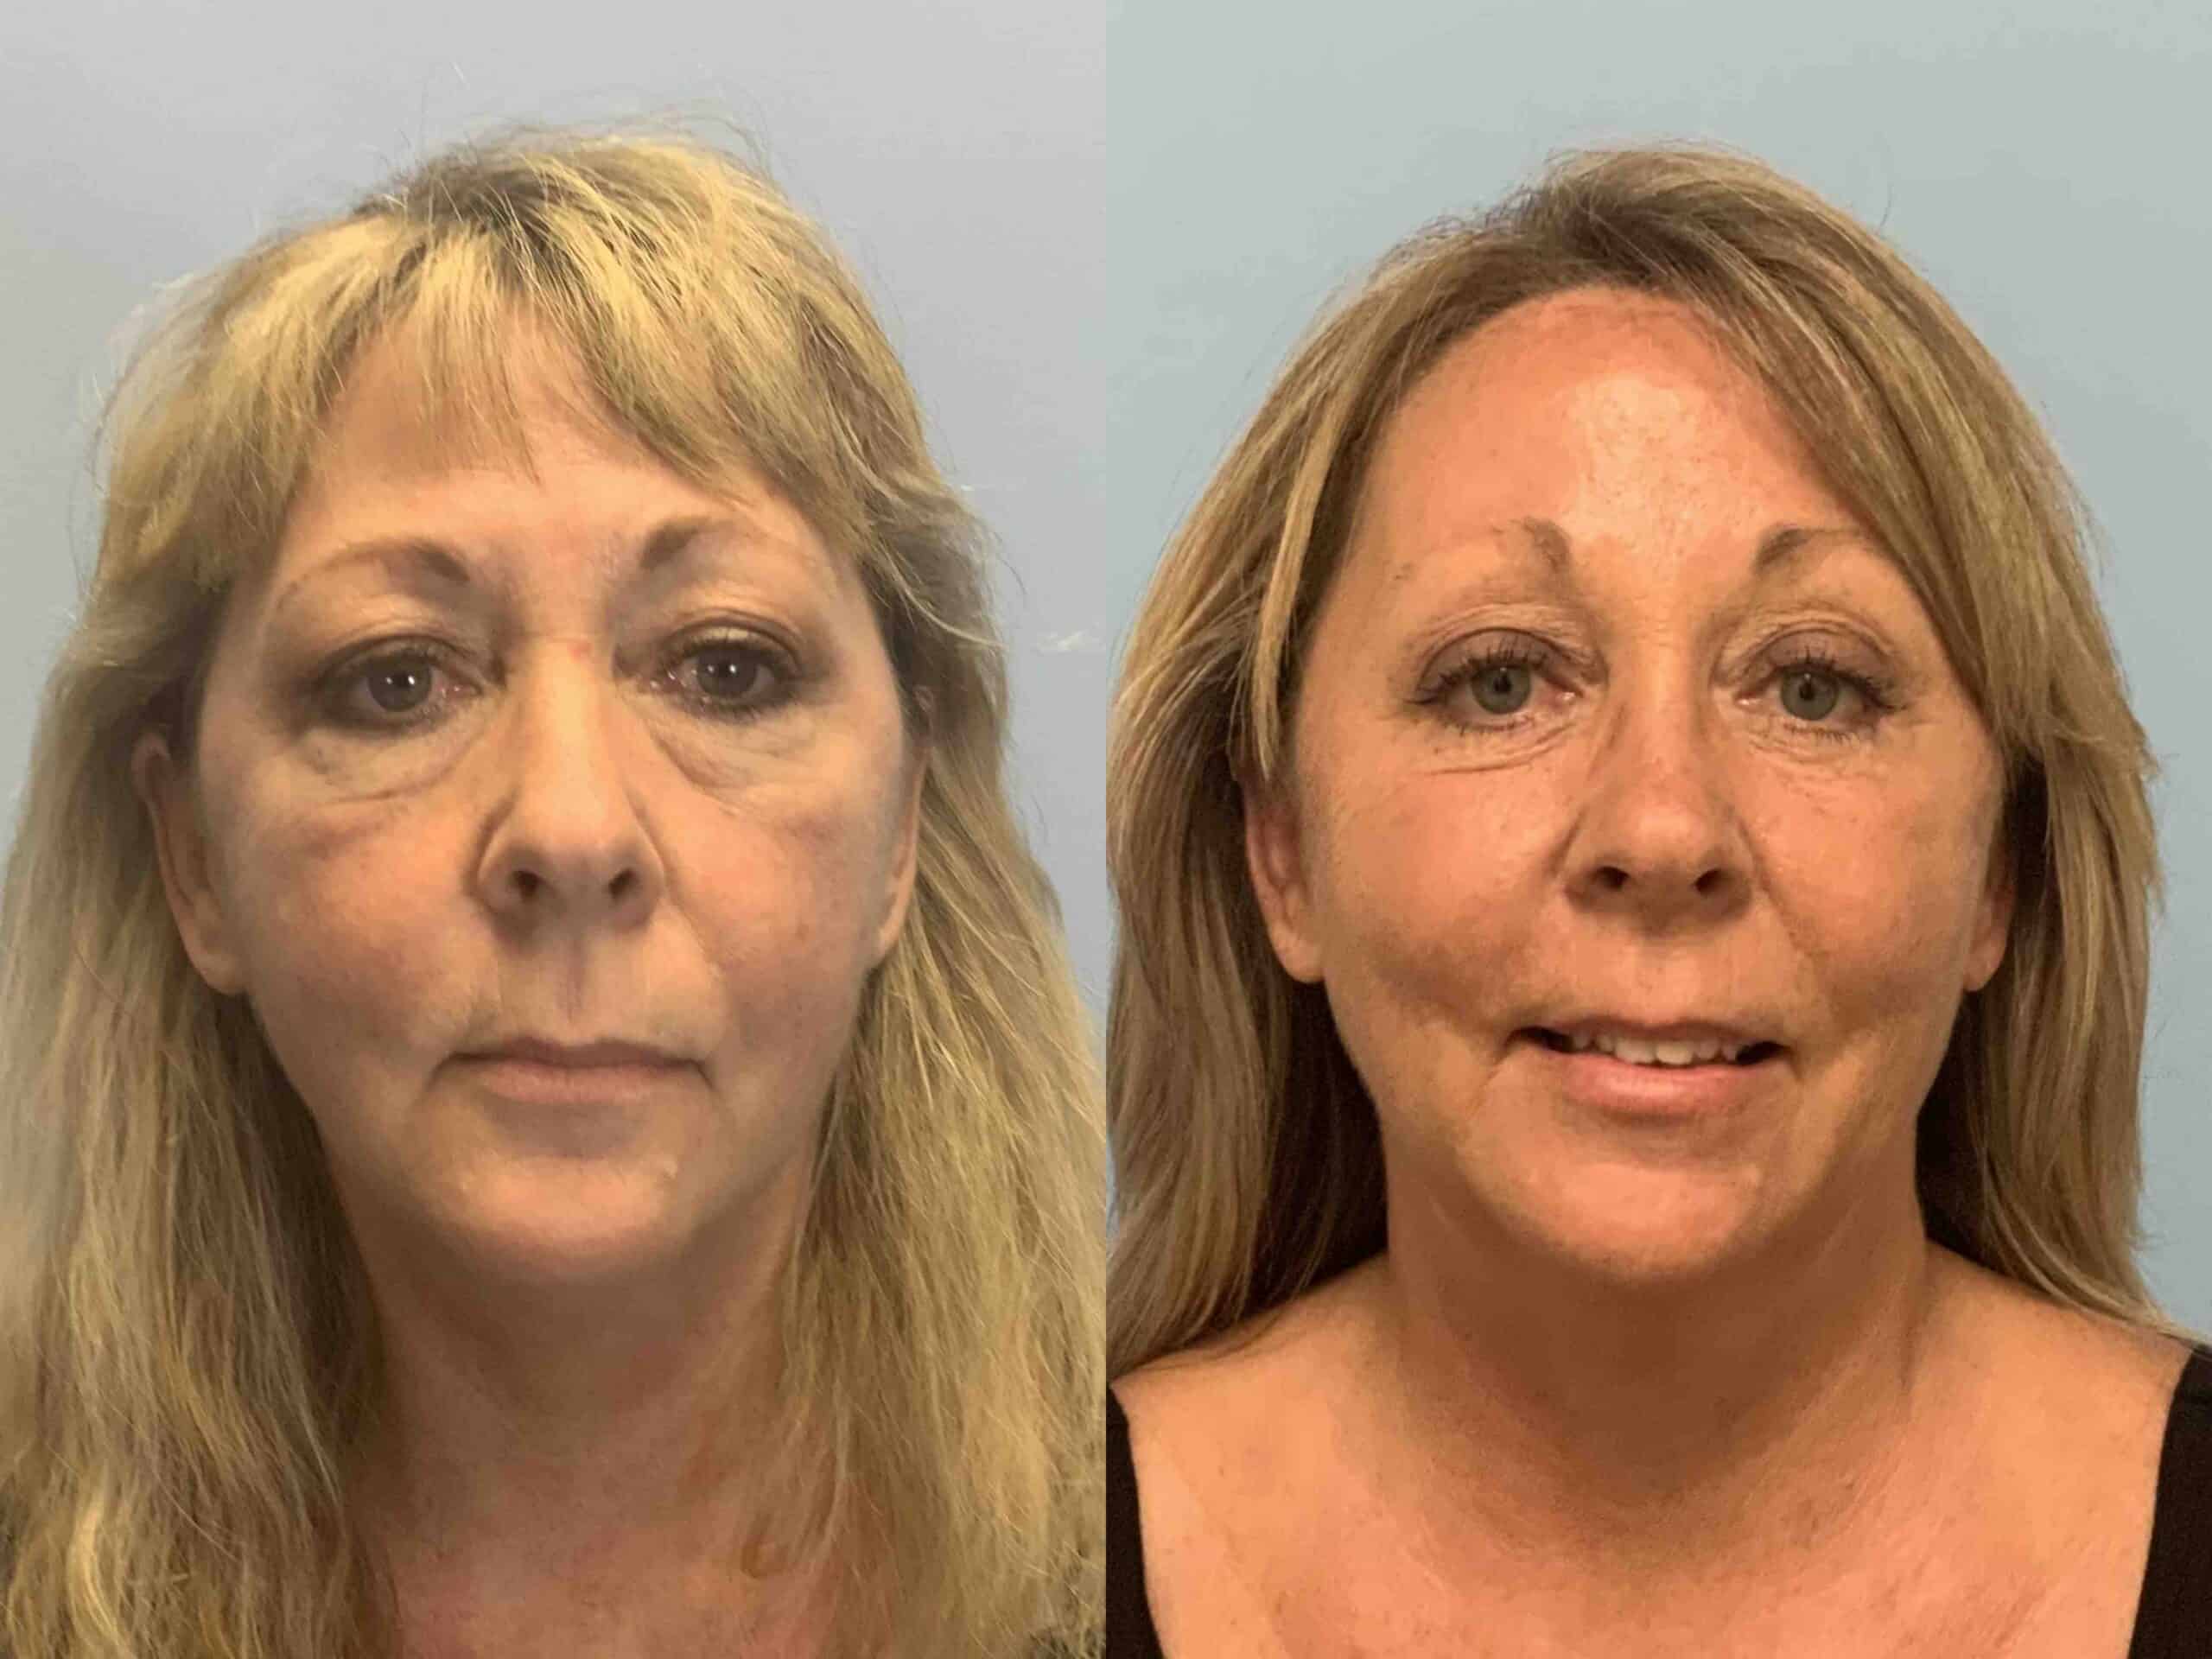 Before and after, 1 year/8 mo post op from Upper and Lower Blepharoplasty, Autologous Fat Transfer to Face, Endo Brow Lift performed by Dr. Paul Vanek (front view)